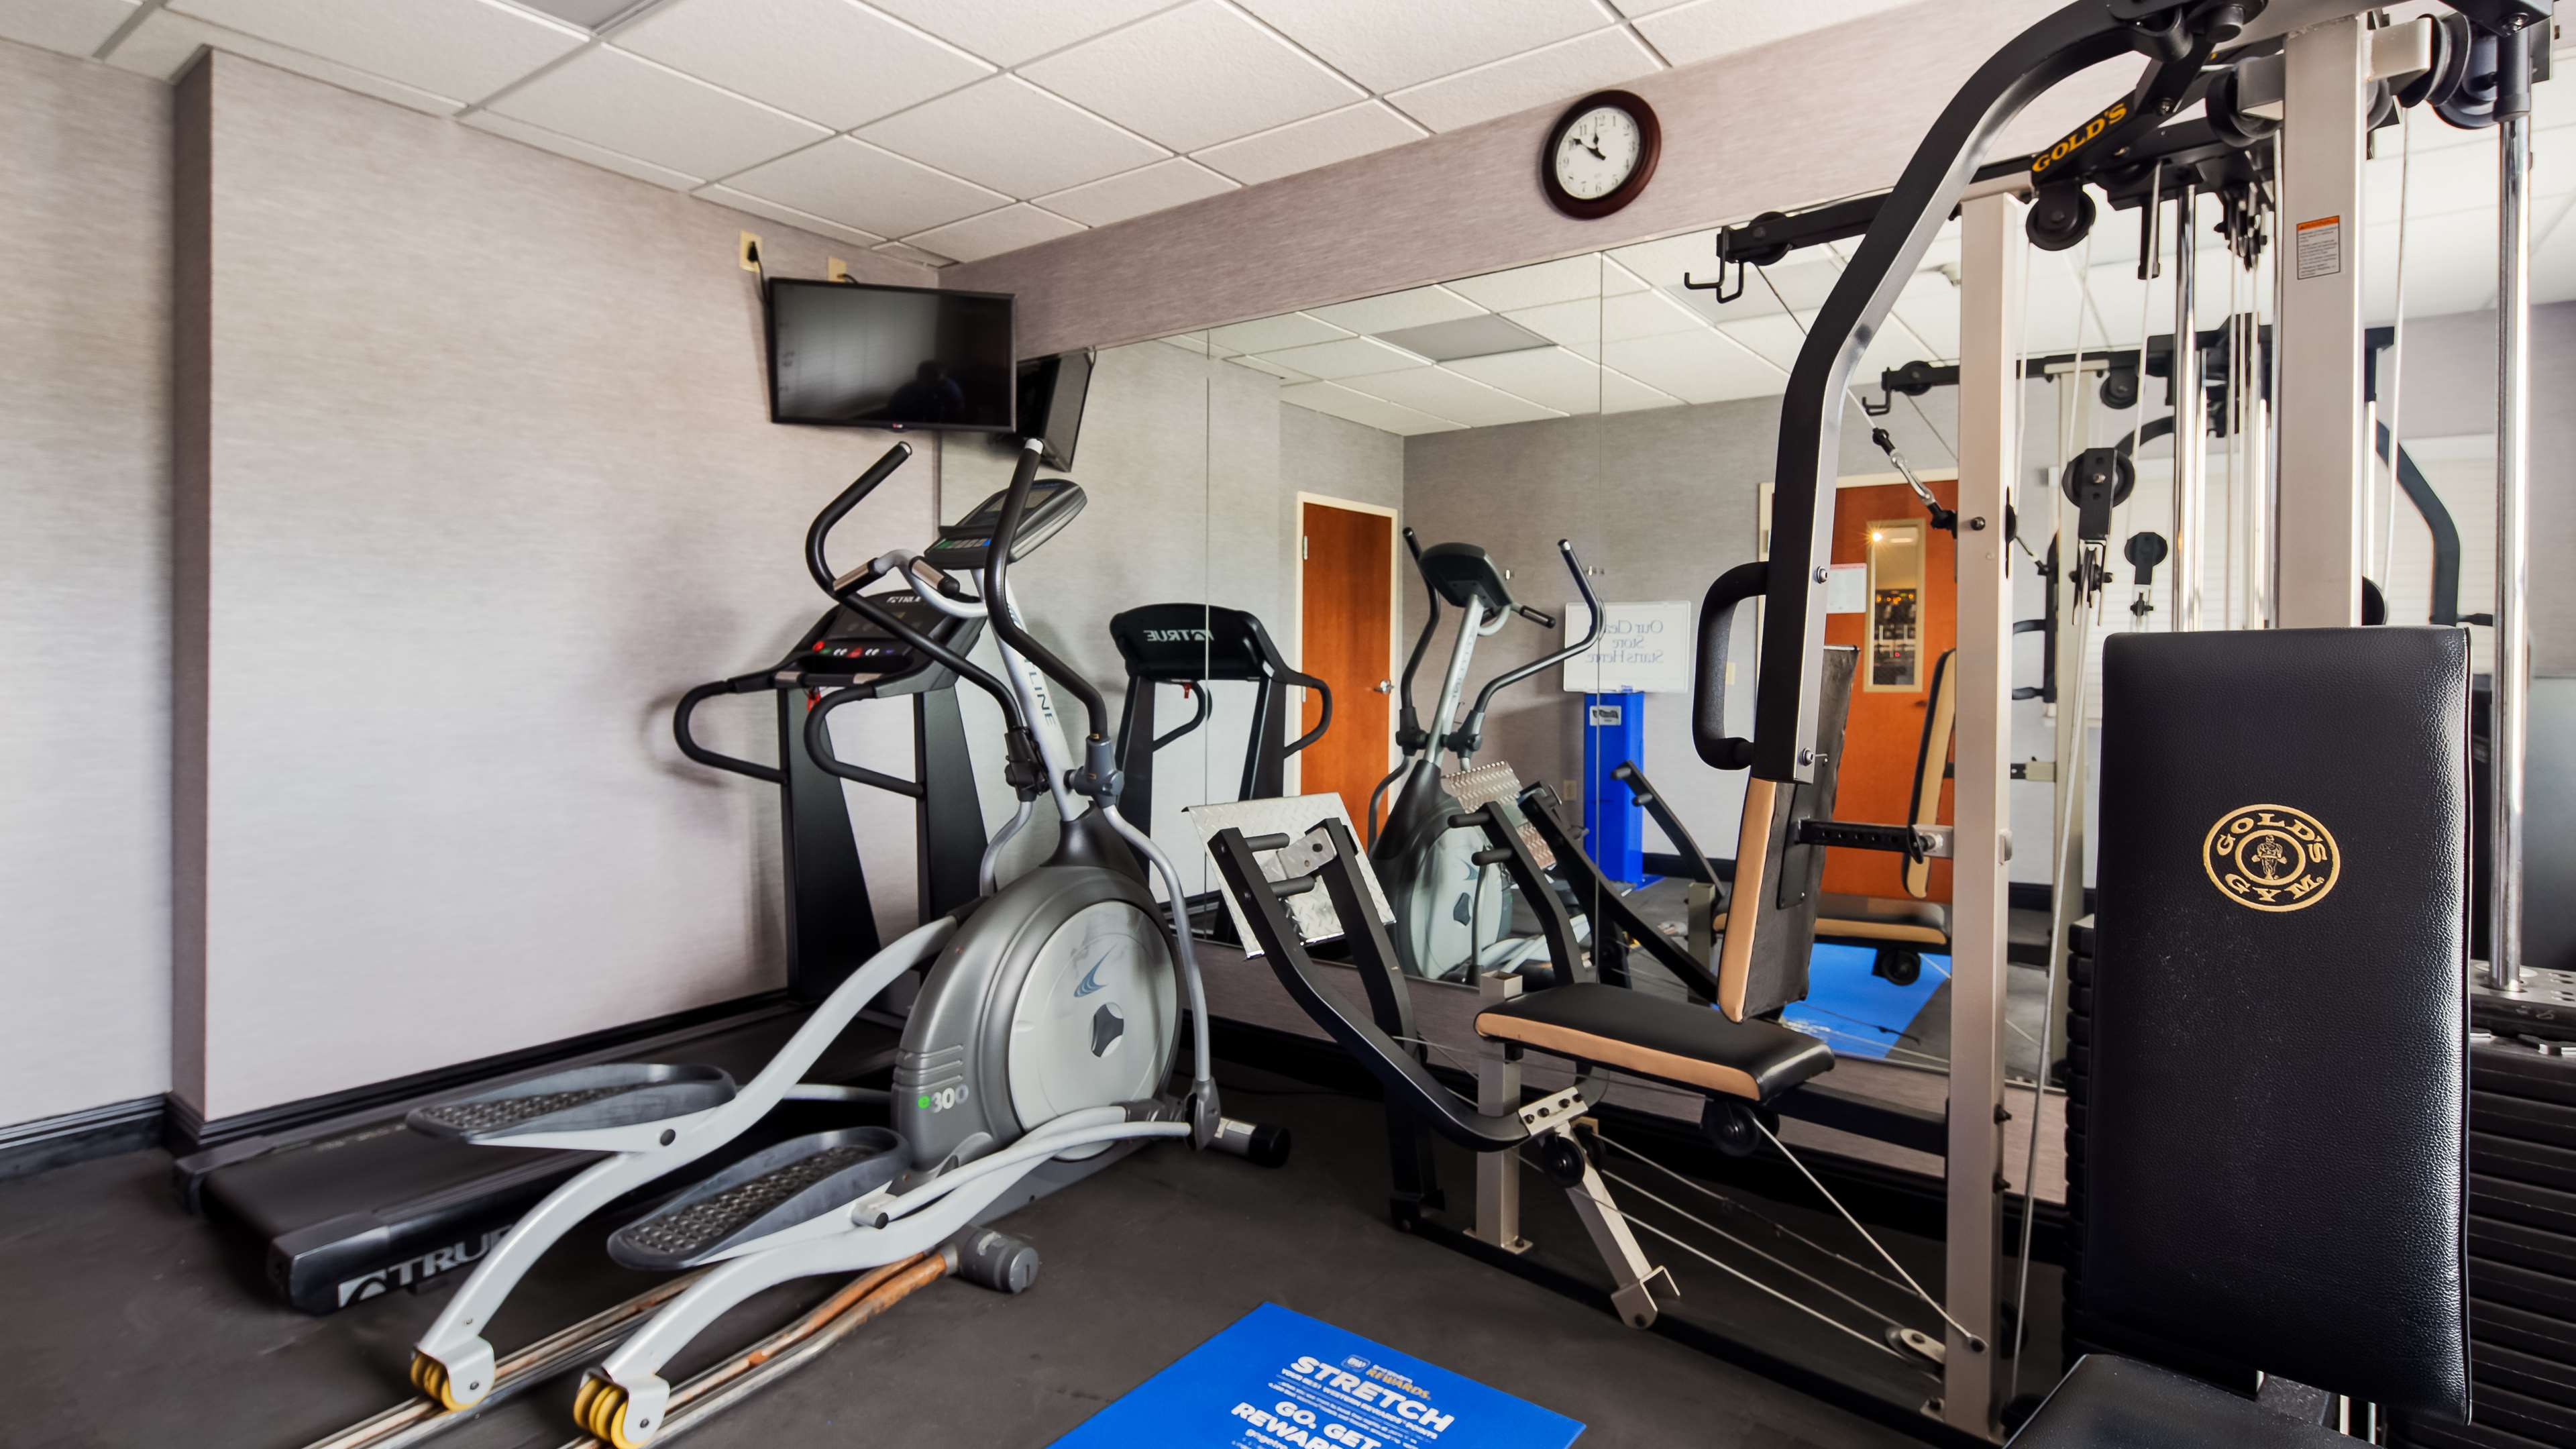 Keep fit on our treadmill or elliptical.